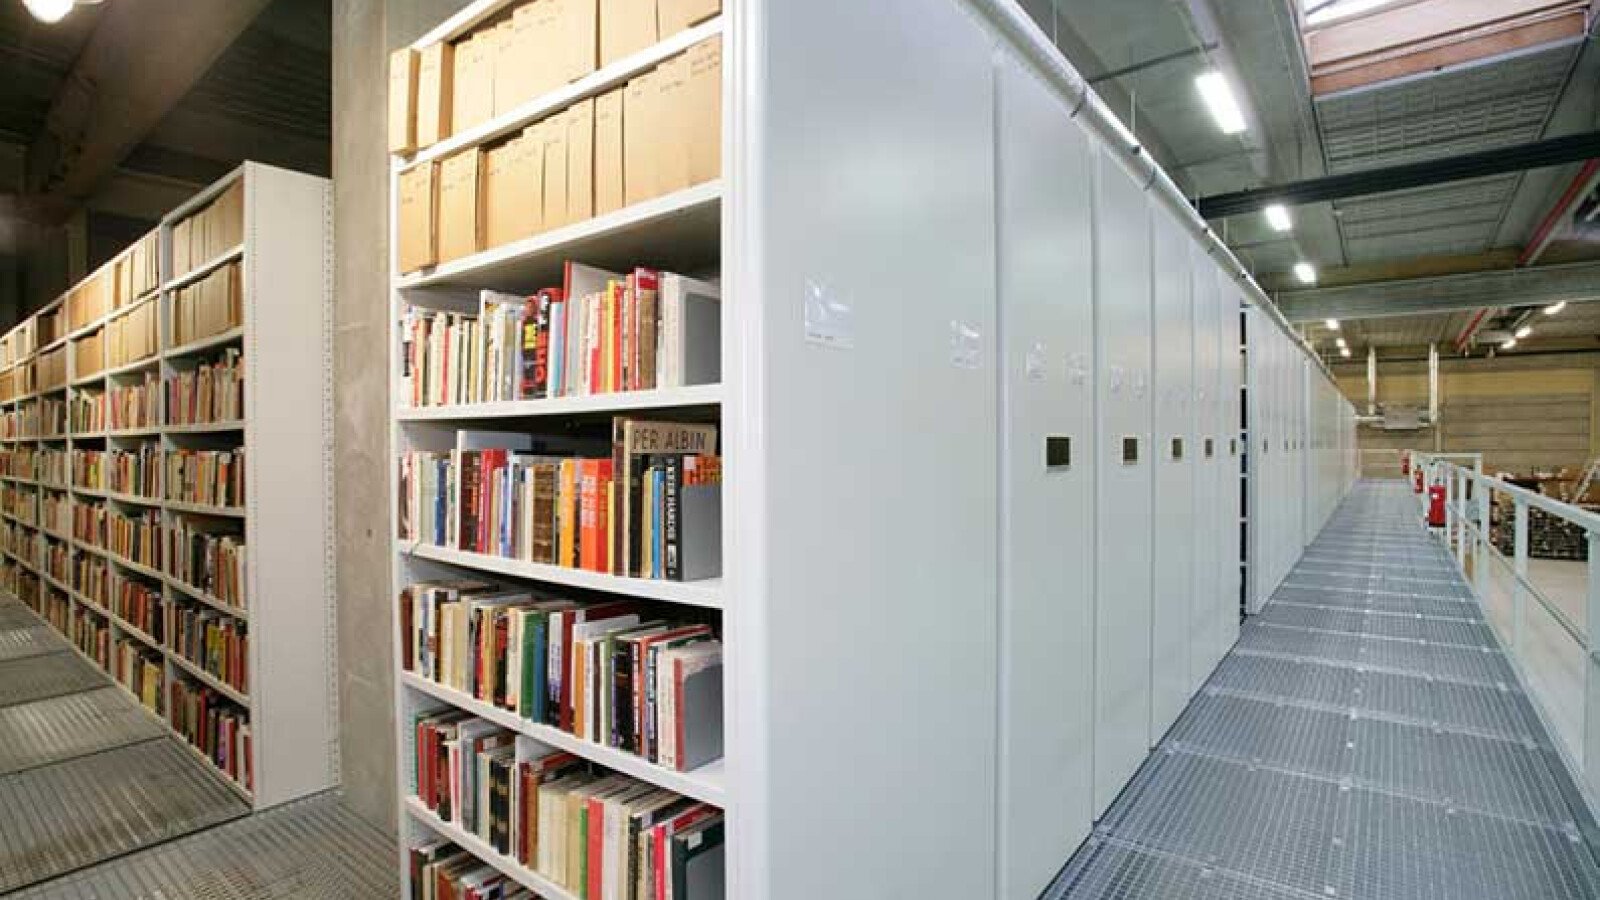 LABOUR MOVEMENT LIBRARY AND ARCHIVE, DENMARK 